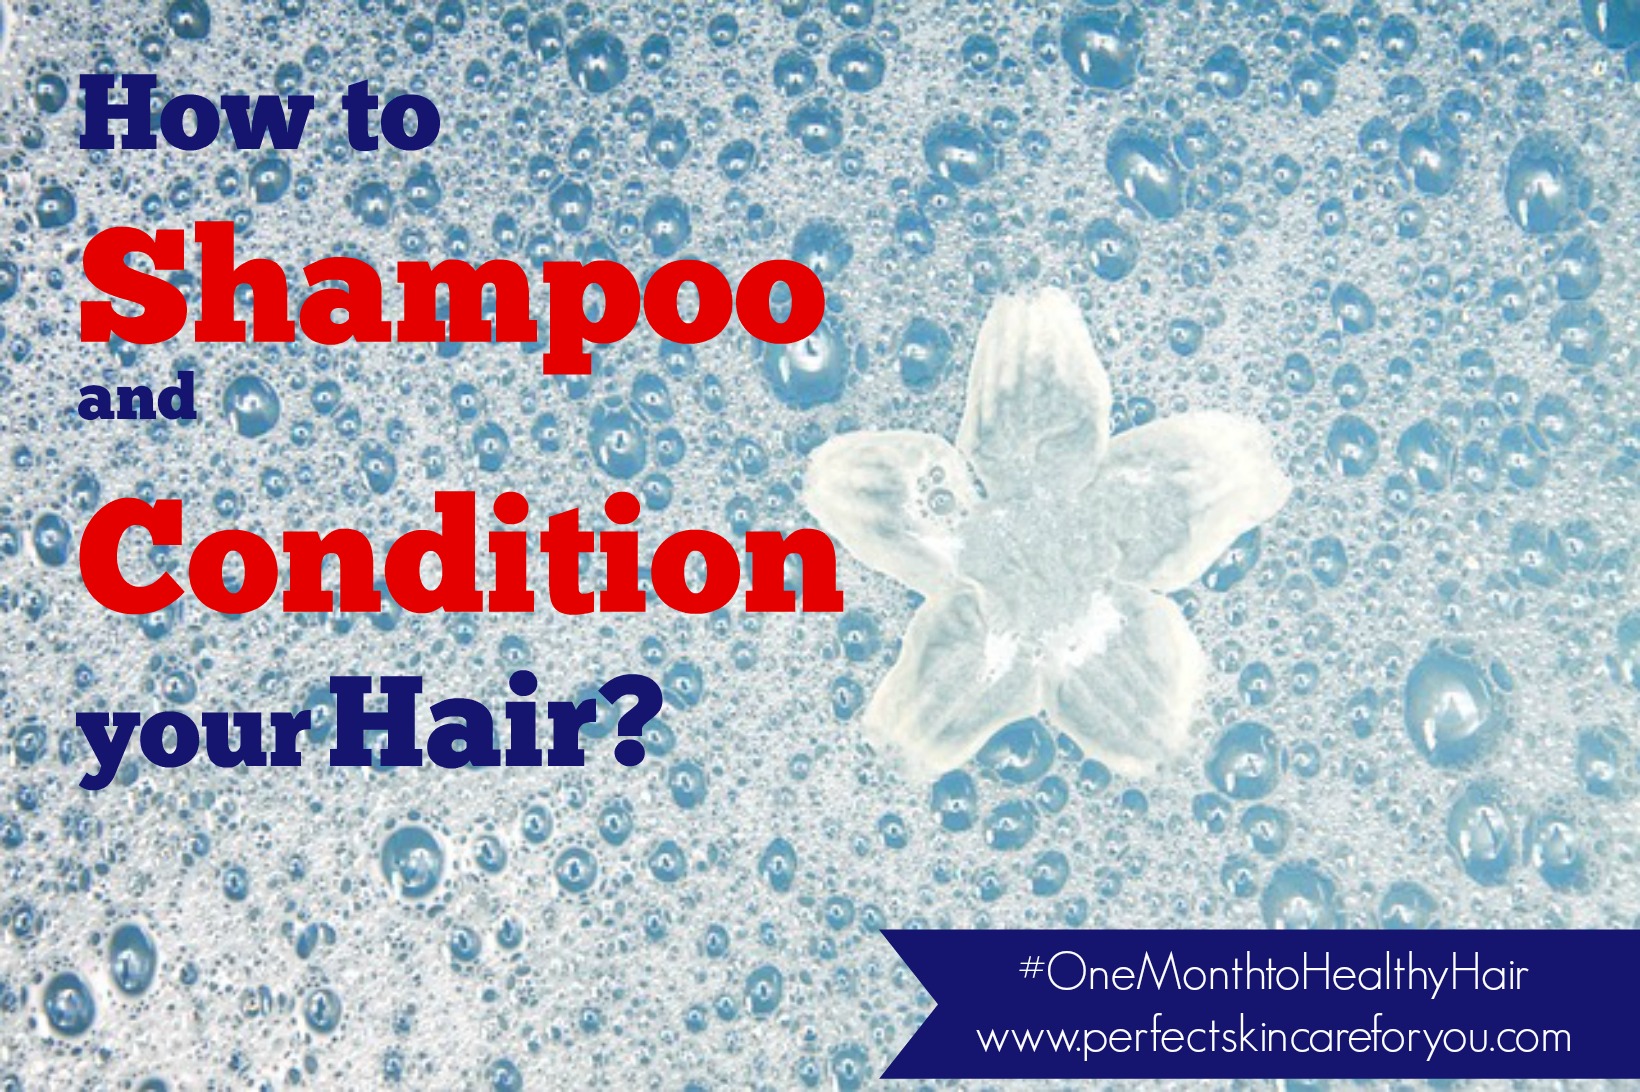 questions on shampoo and condition hair